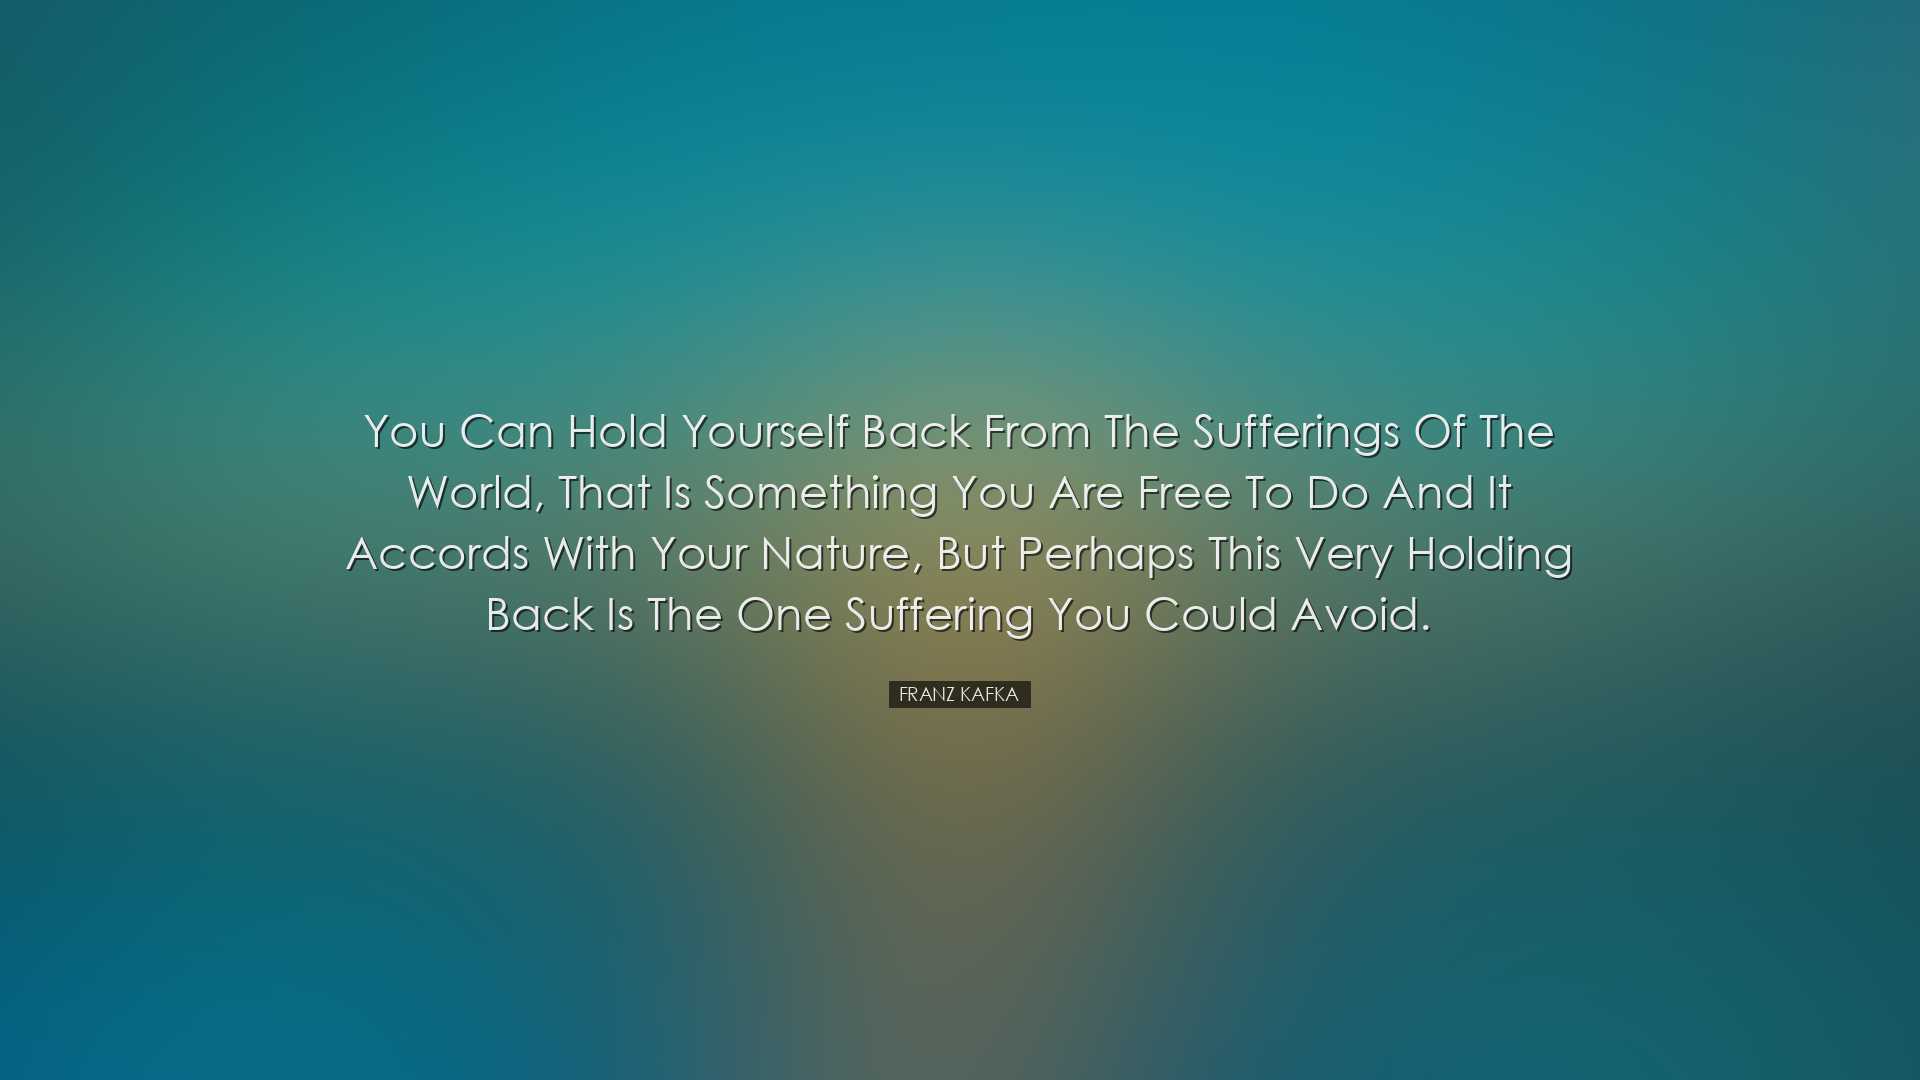 You can hold yourself back from the sufferings of the world, that